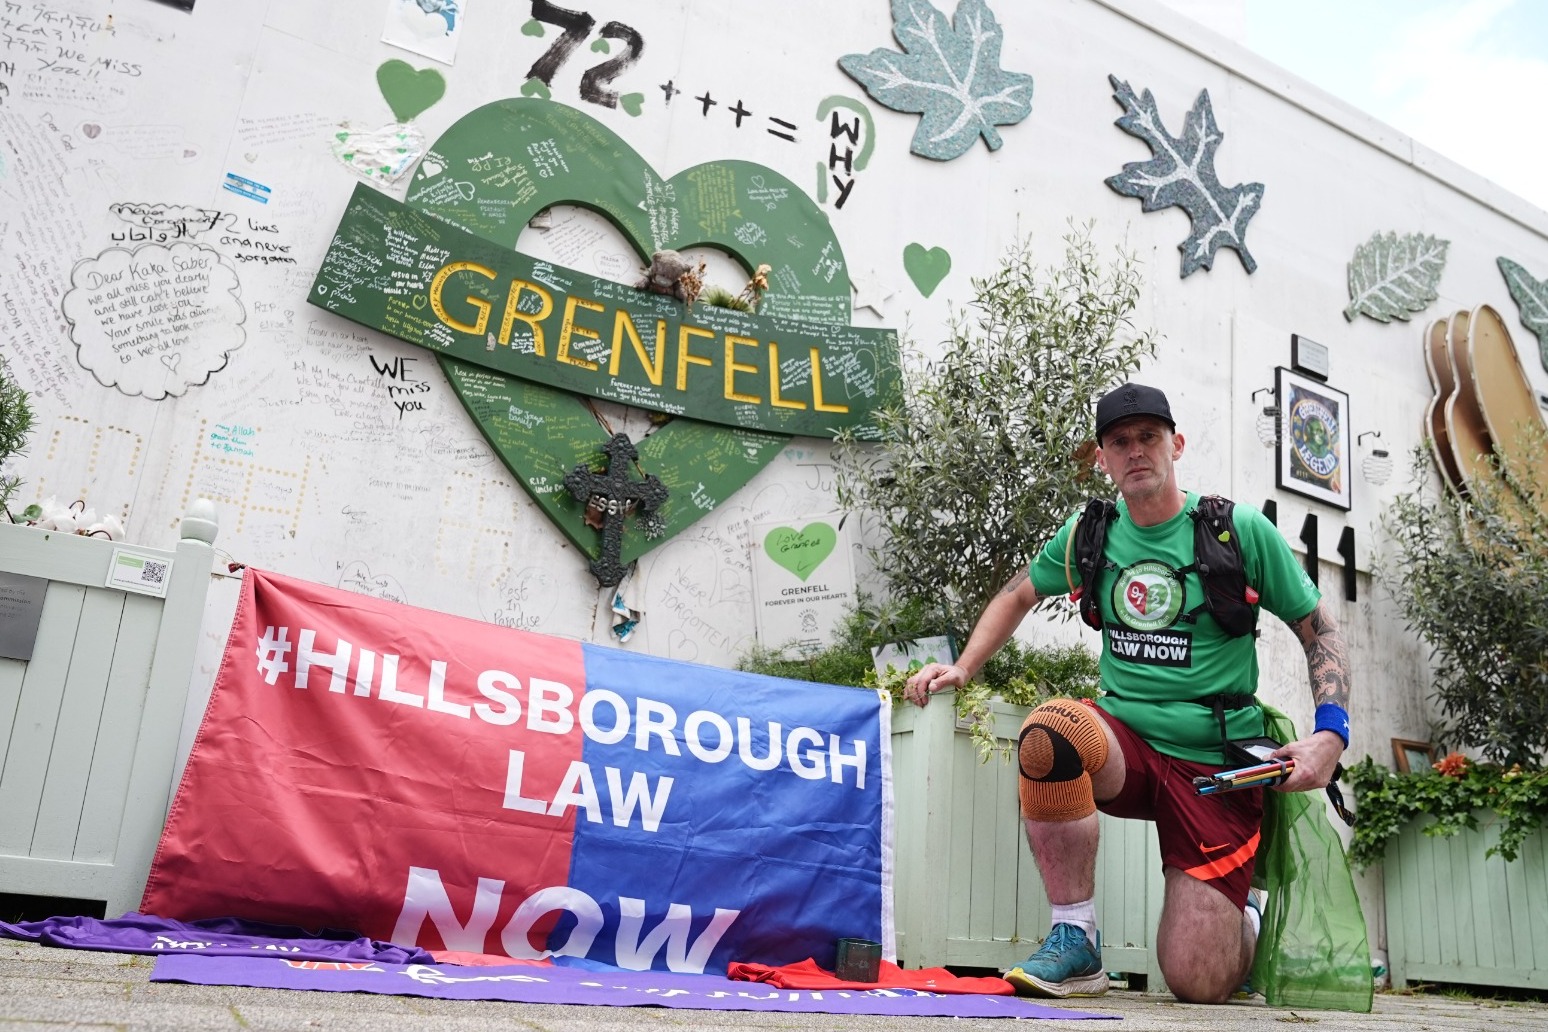 Runner reaches Grenfell after 227-mile challenge 